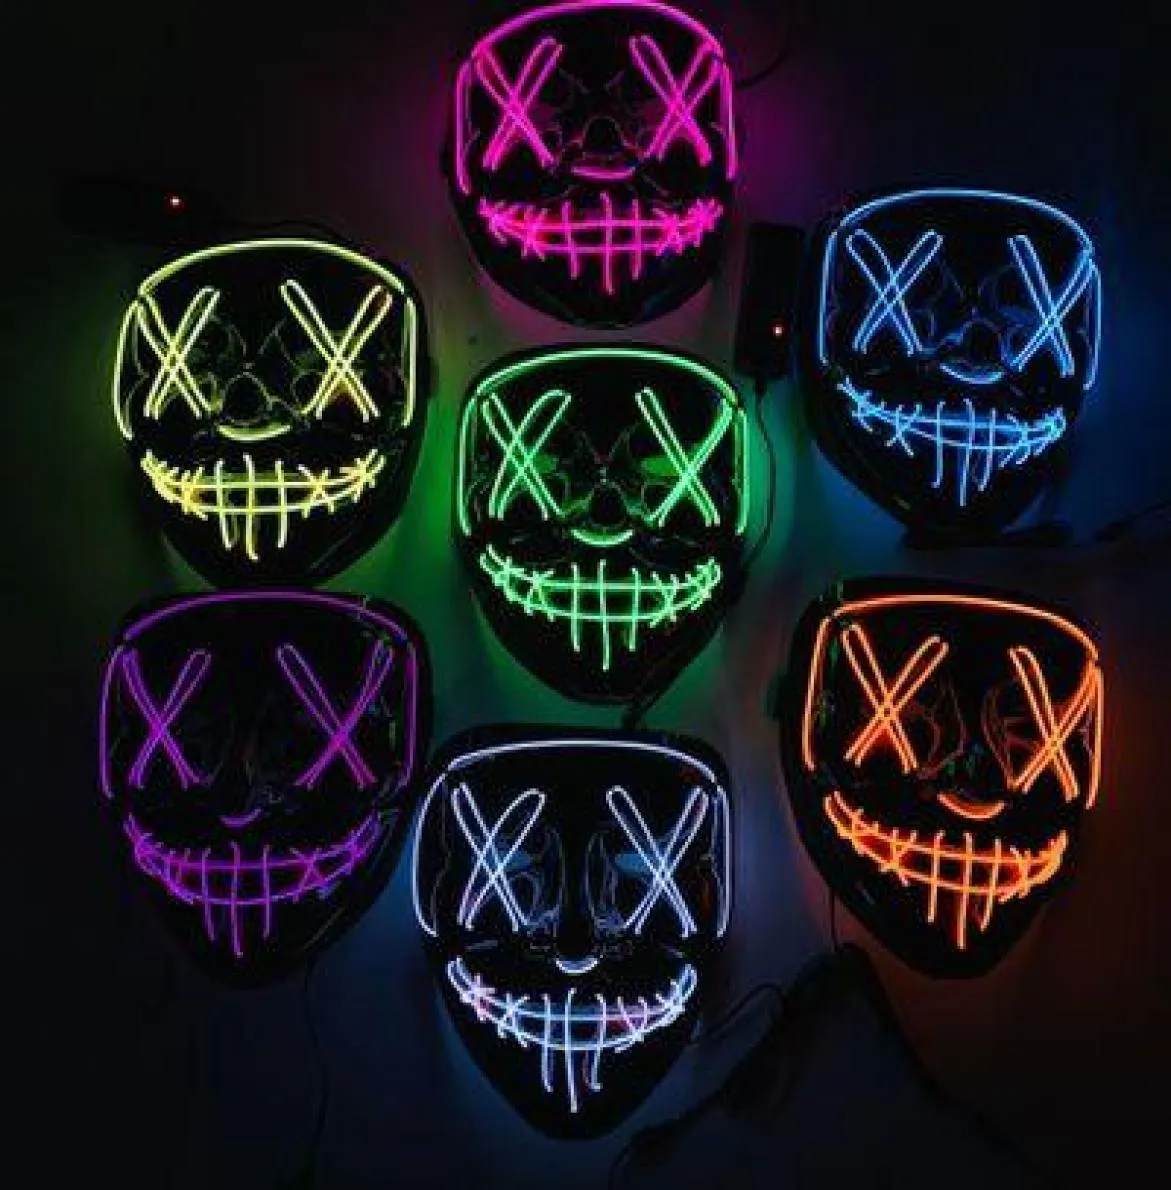 Halloween Mask Led Light Up Funny Masks The Purge Elections Year Great Festival Cosplay Costume Supplies Party Masks EEA4707815413